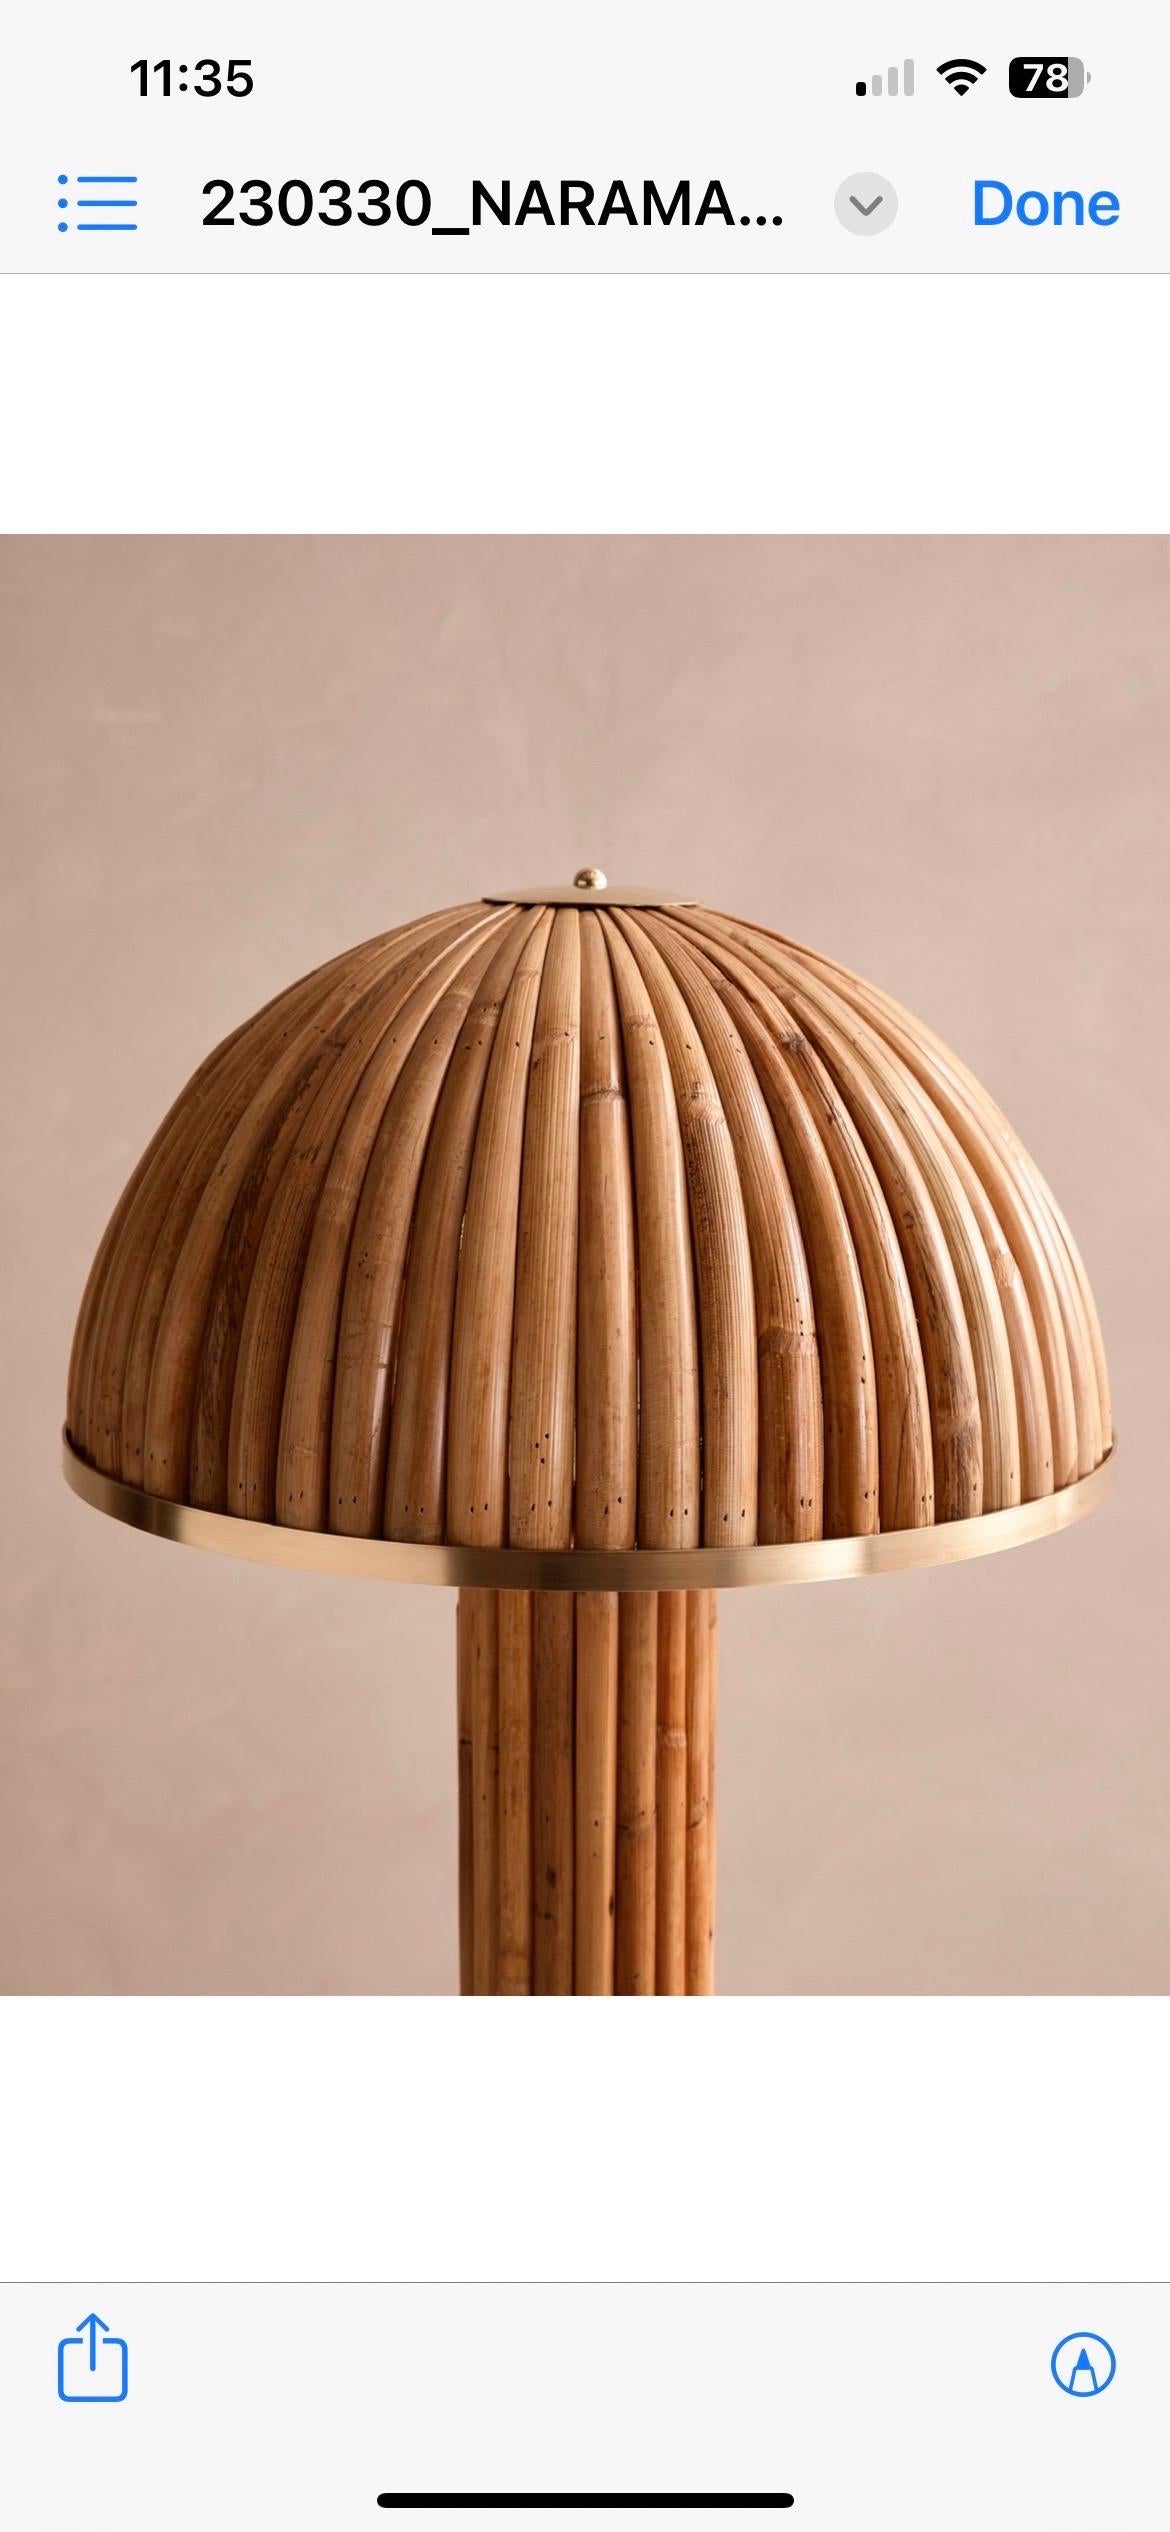 Italian Bamboo and Brass Gabriella Crespi Inspired Pair of Lamps  In New Condition For Sale In New York, NY